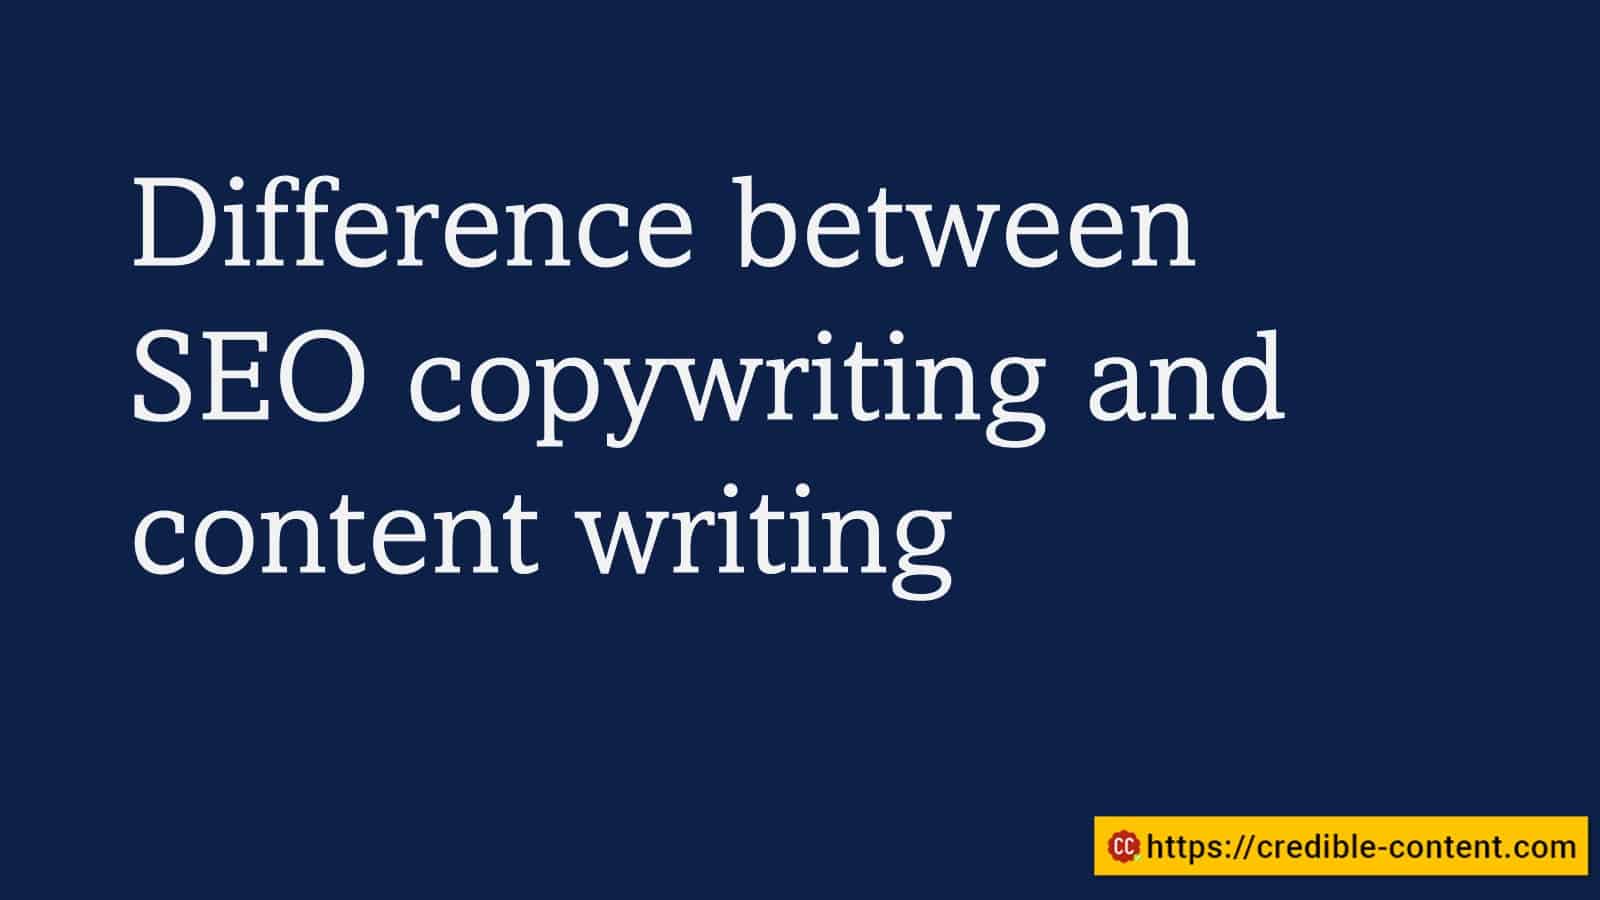 Difference between SEO copywriting and content writing